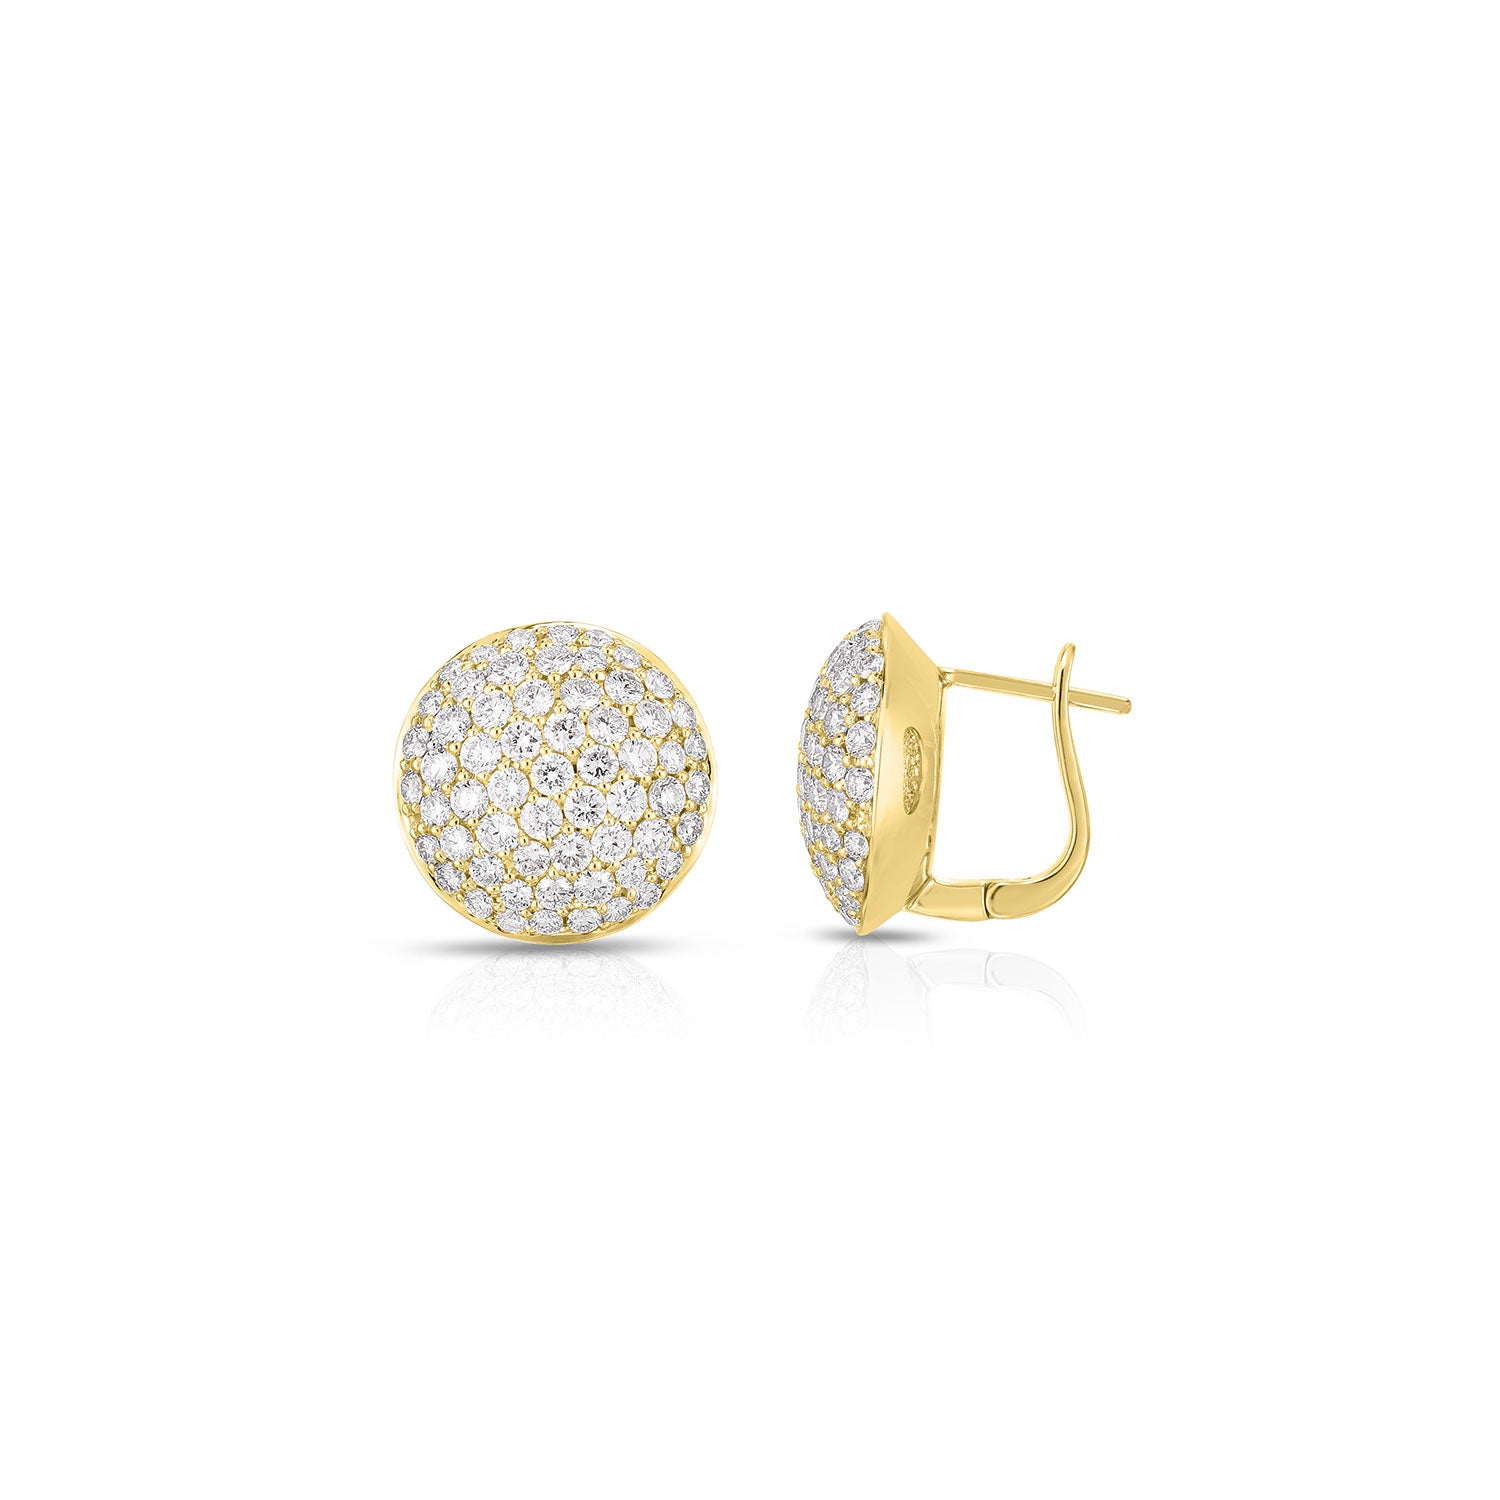 Domed Button Stud Earrings in Yellow Gold